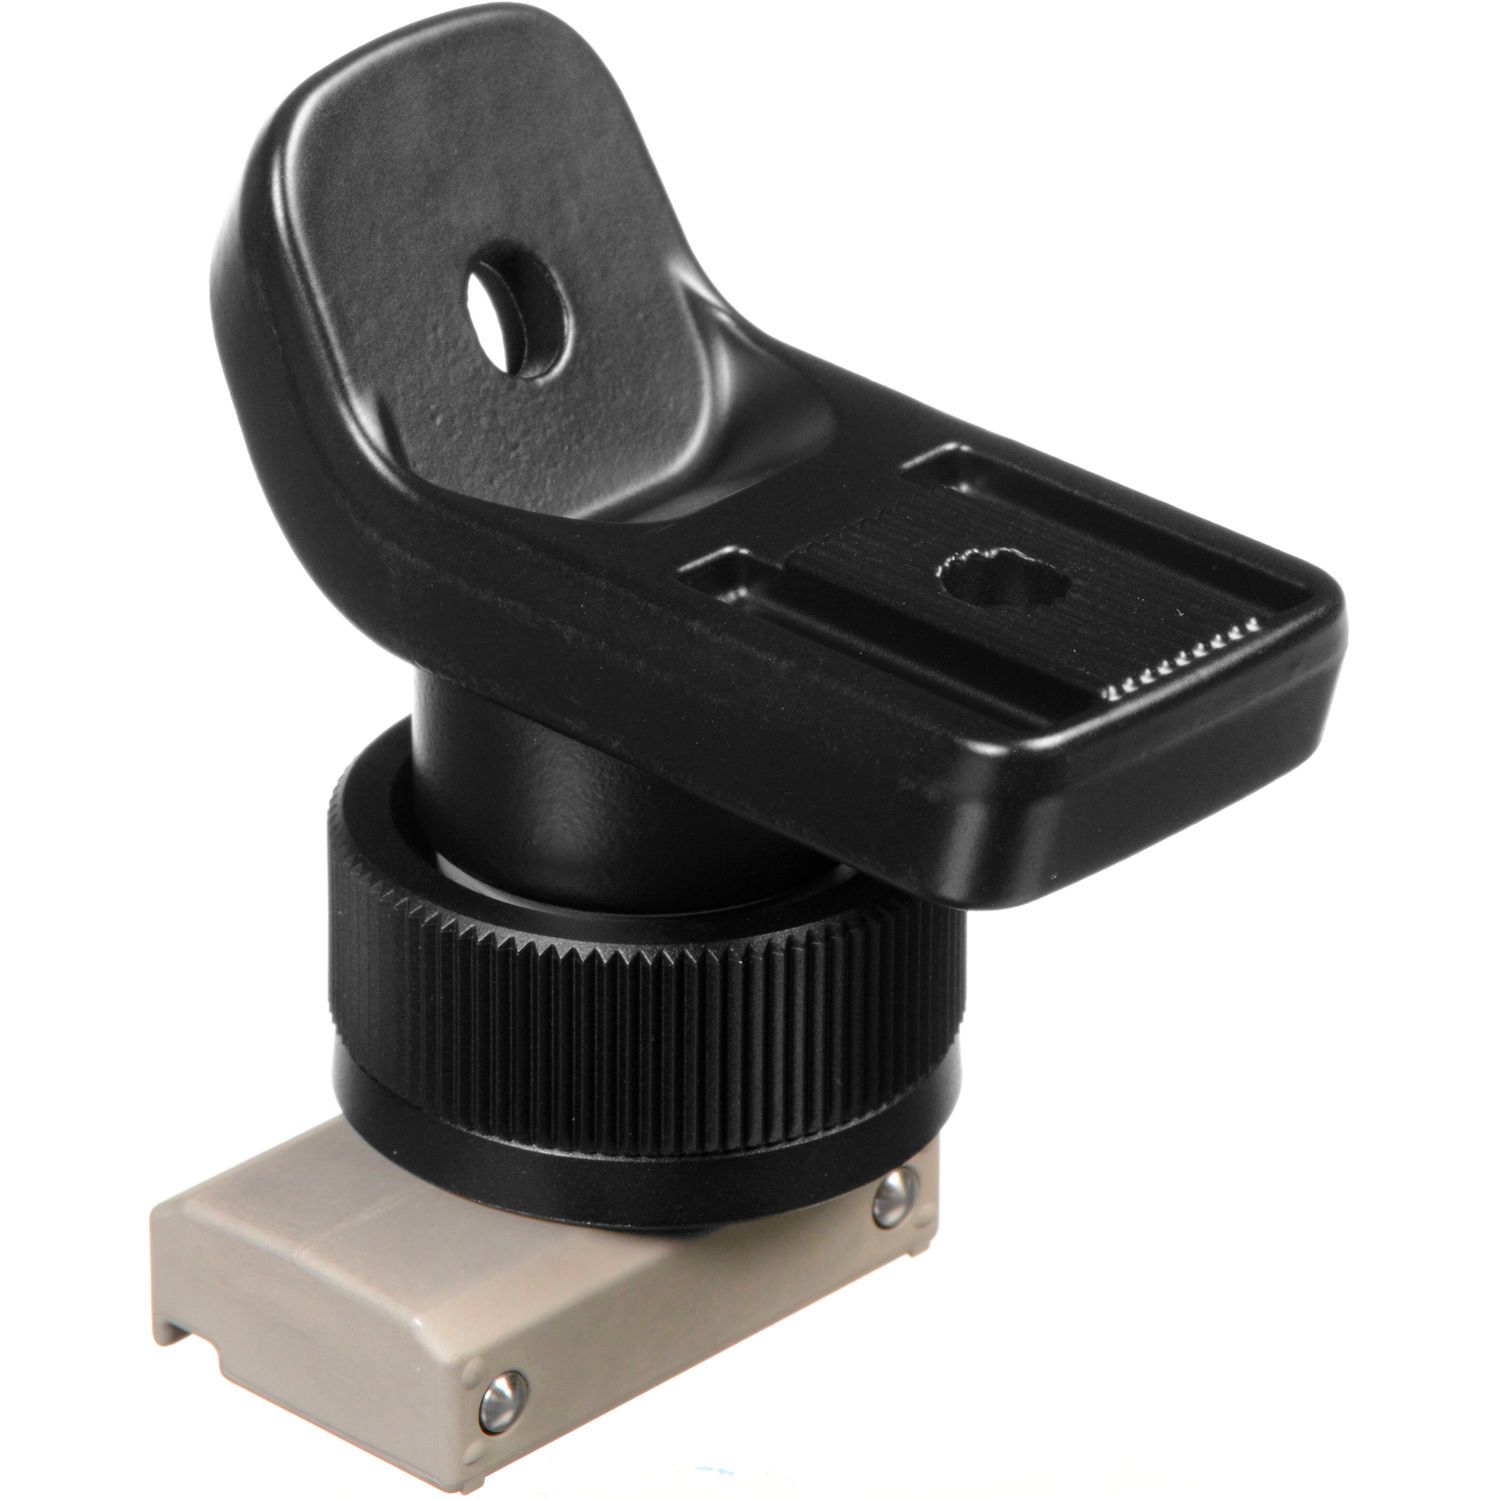 CANON - Clamp Base for EVF V70